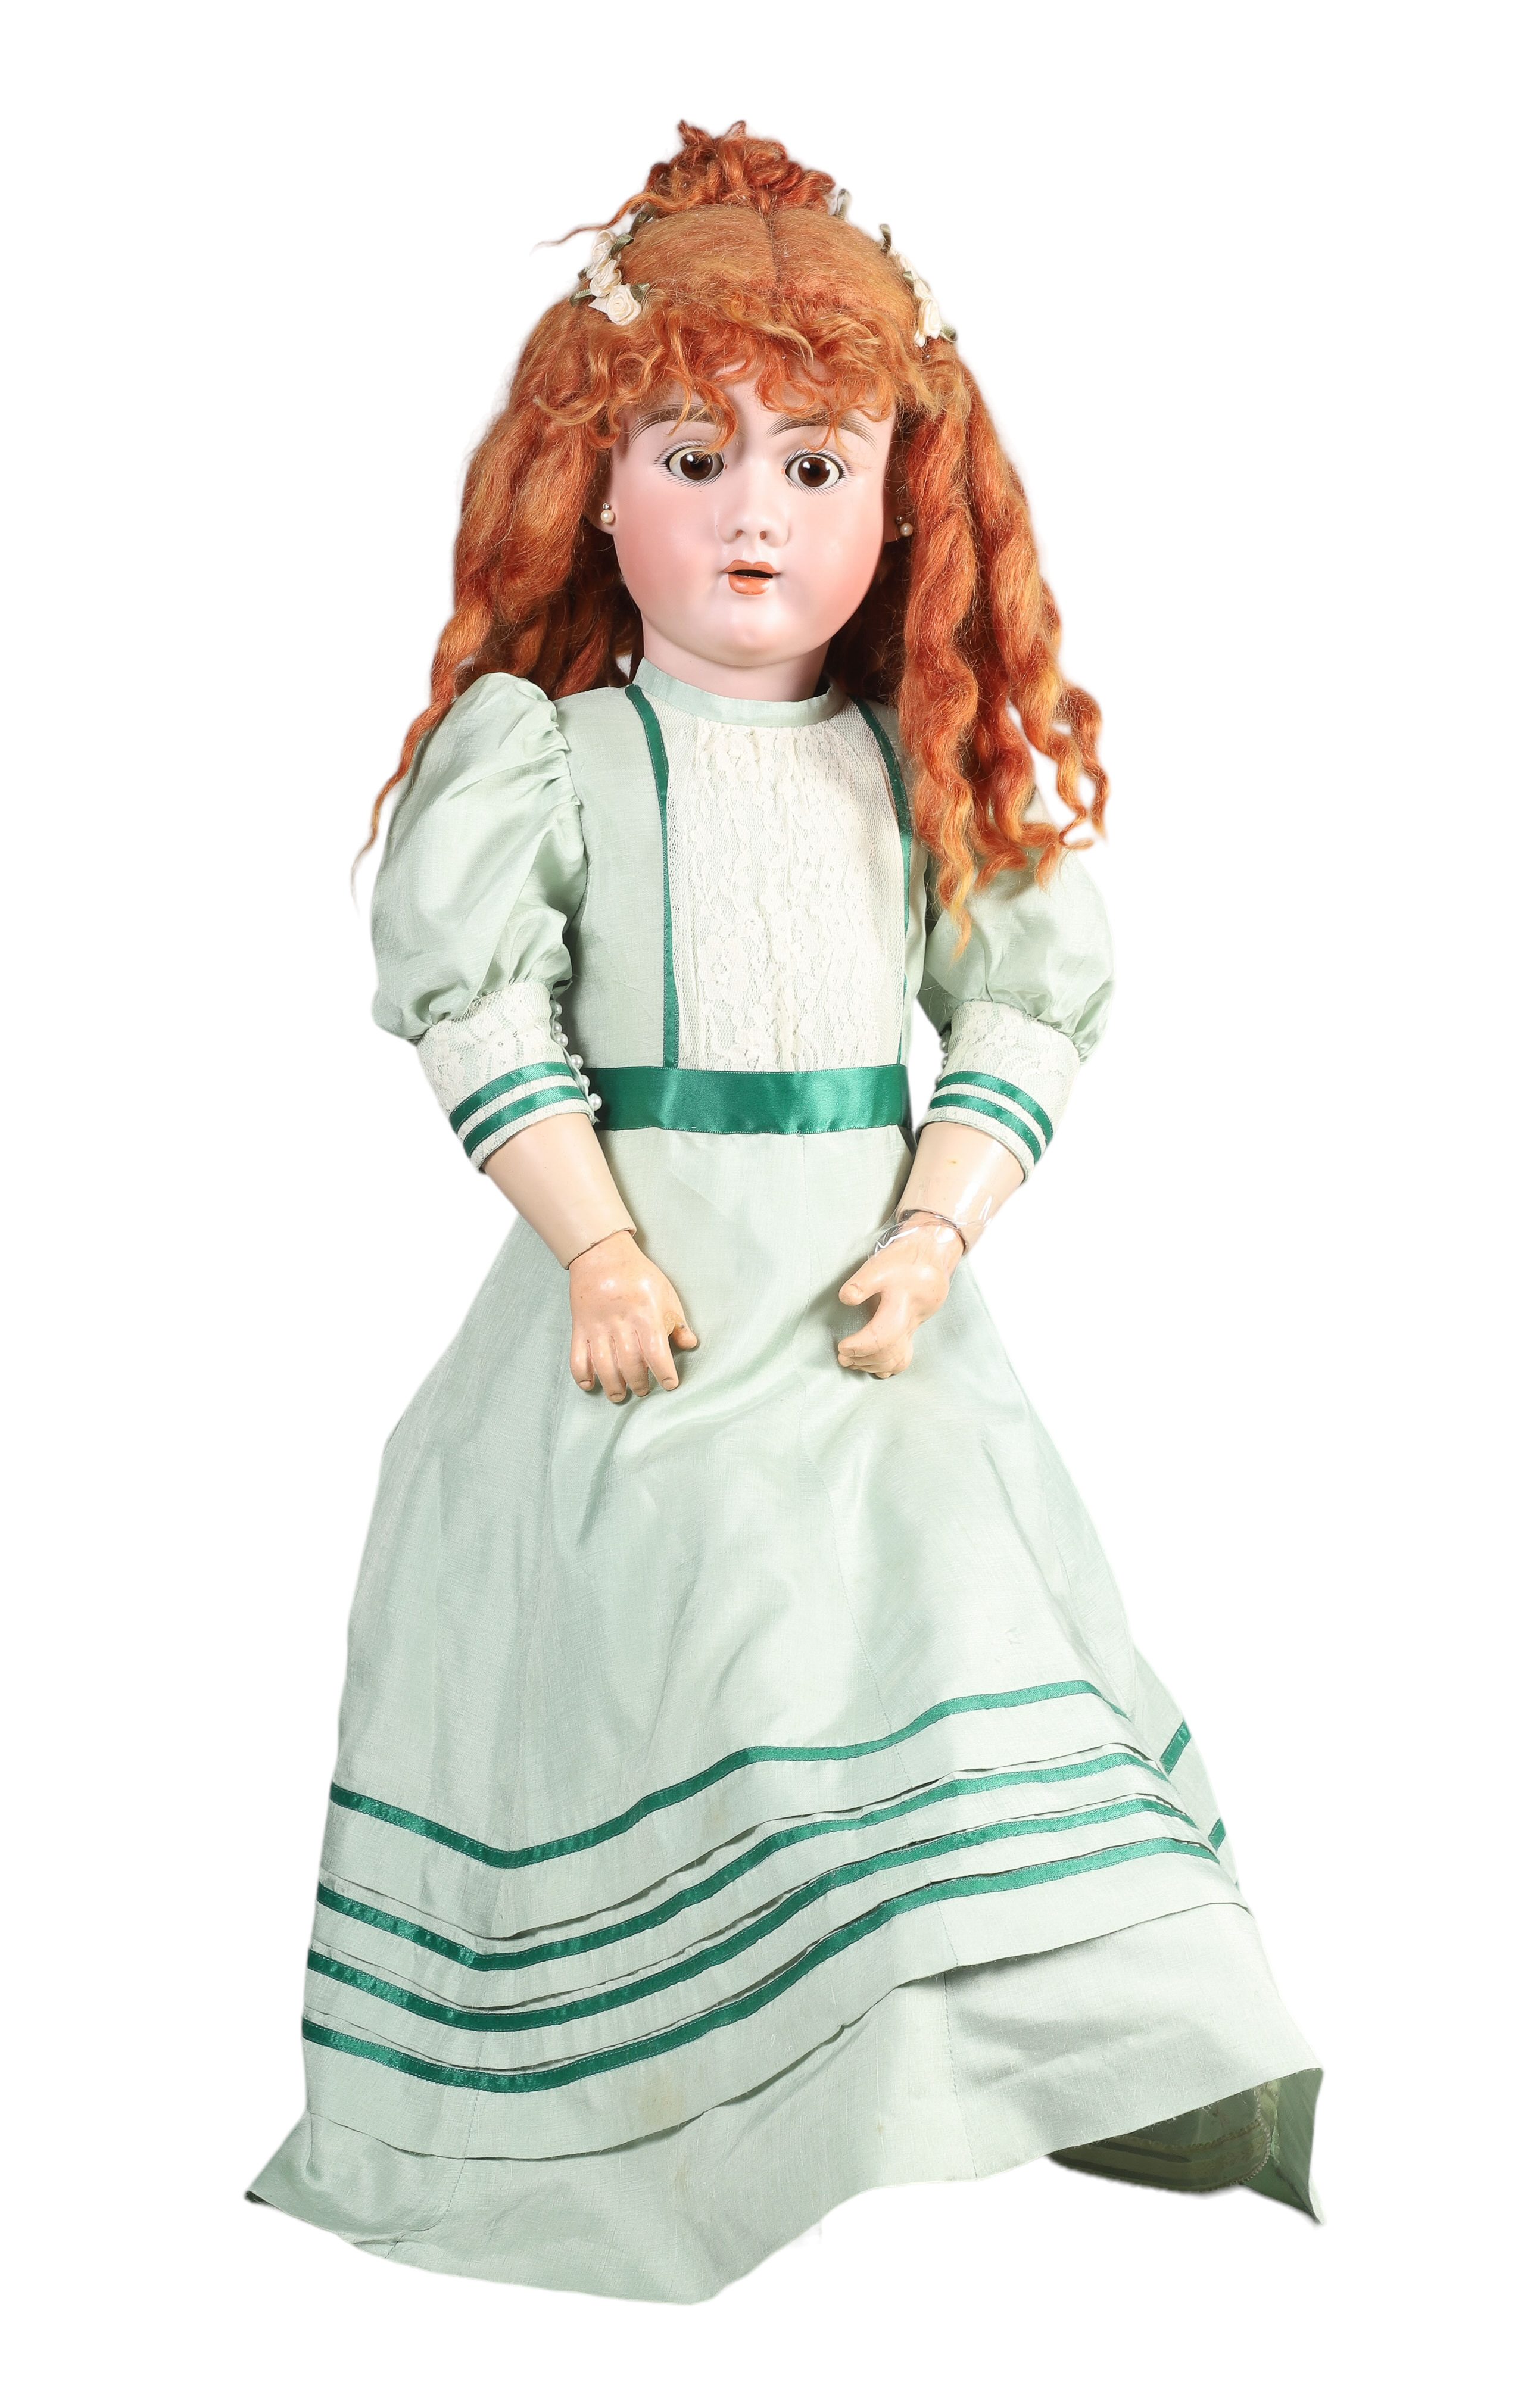 Large porcelain doll, open mouth,